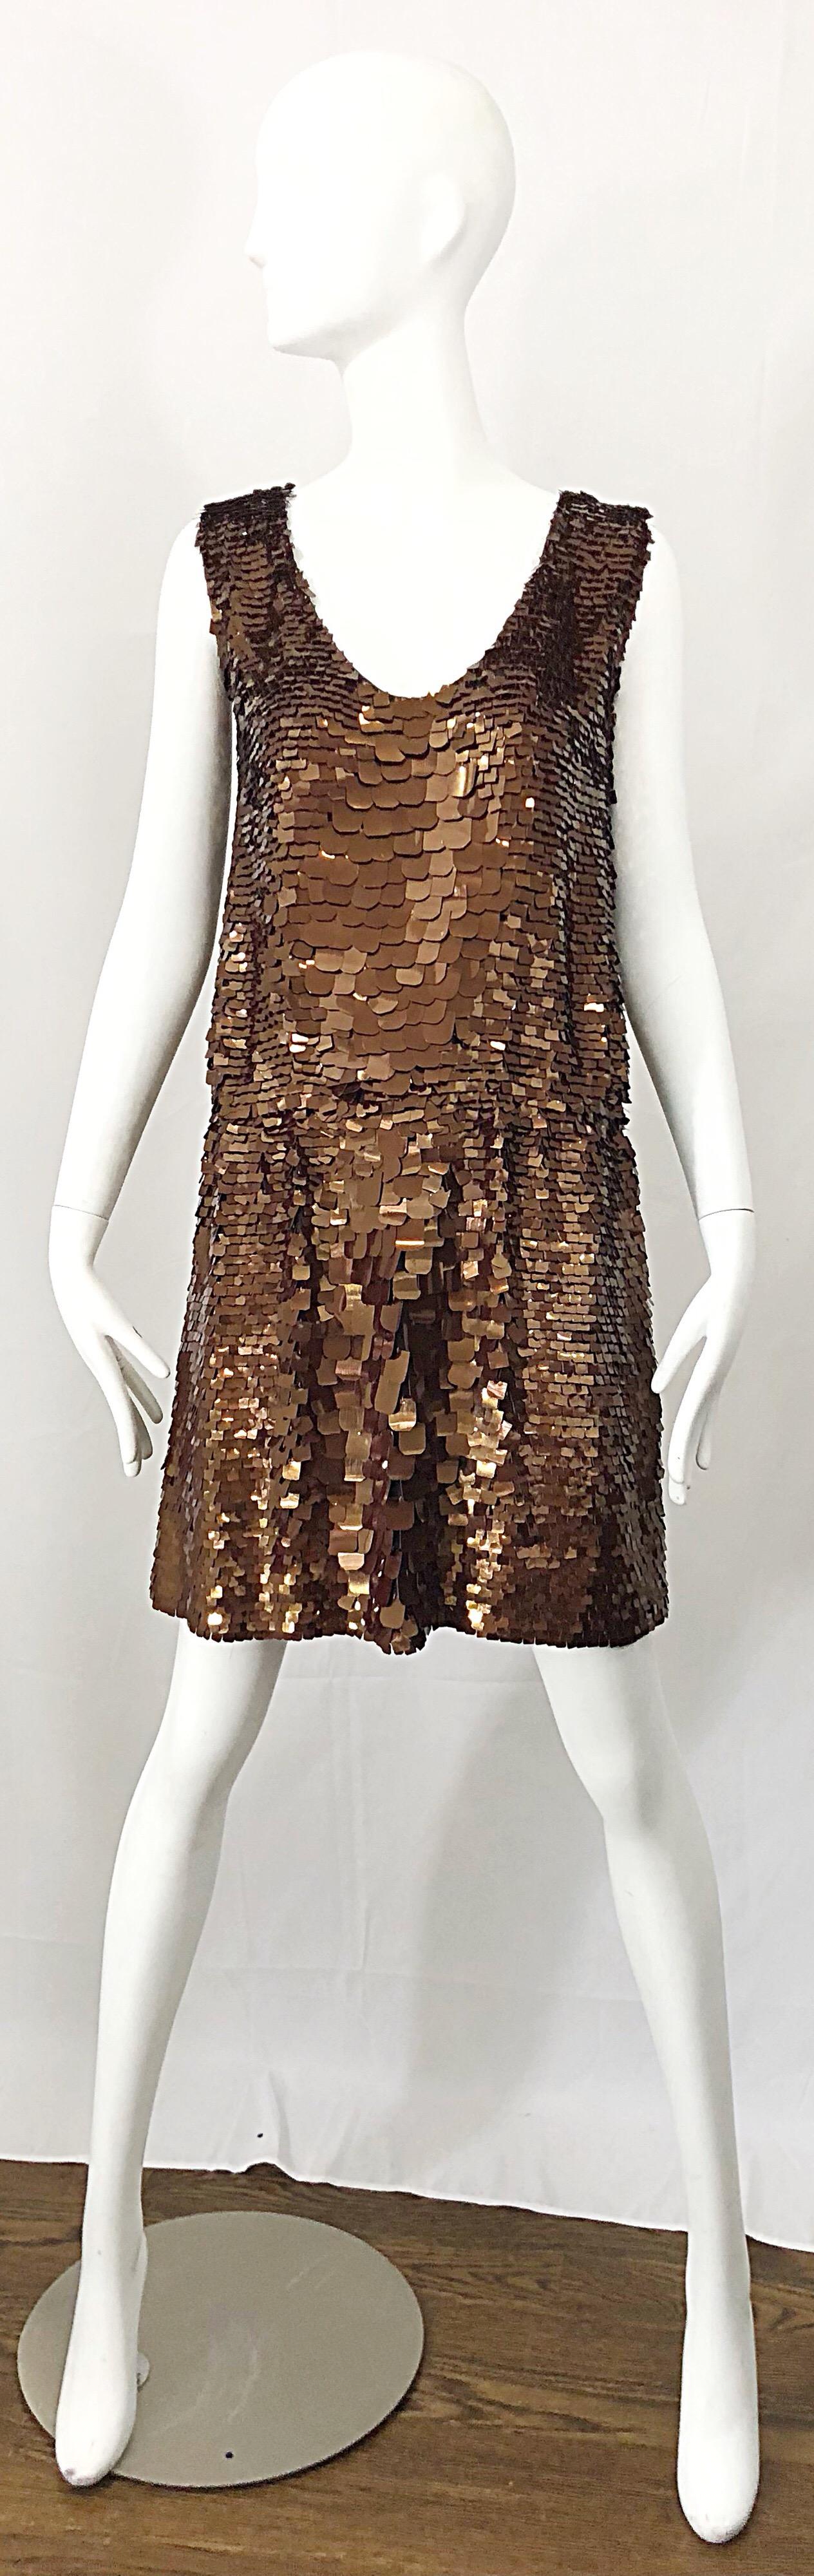 Amazing 90s does 20s ISAAC MIZRAHI chocolate brown sequined paillette encrusted silk Gatsby style flapper dress! Features thousands of hand-sewn brown paillettes in a variety of shapes and sizes. Elastic waistband stretches to fit. The perfect